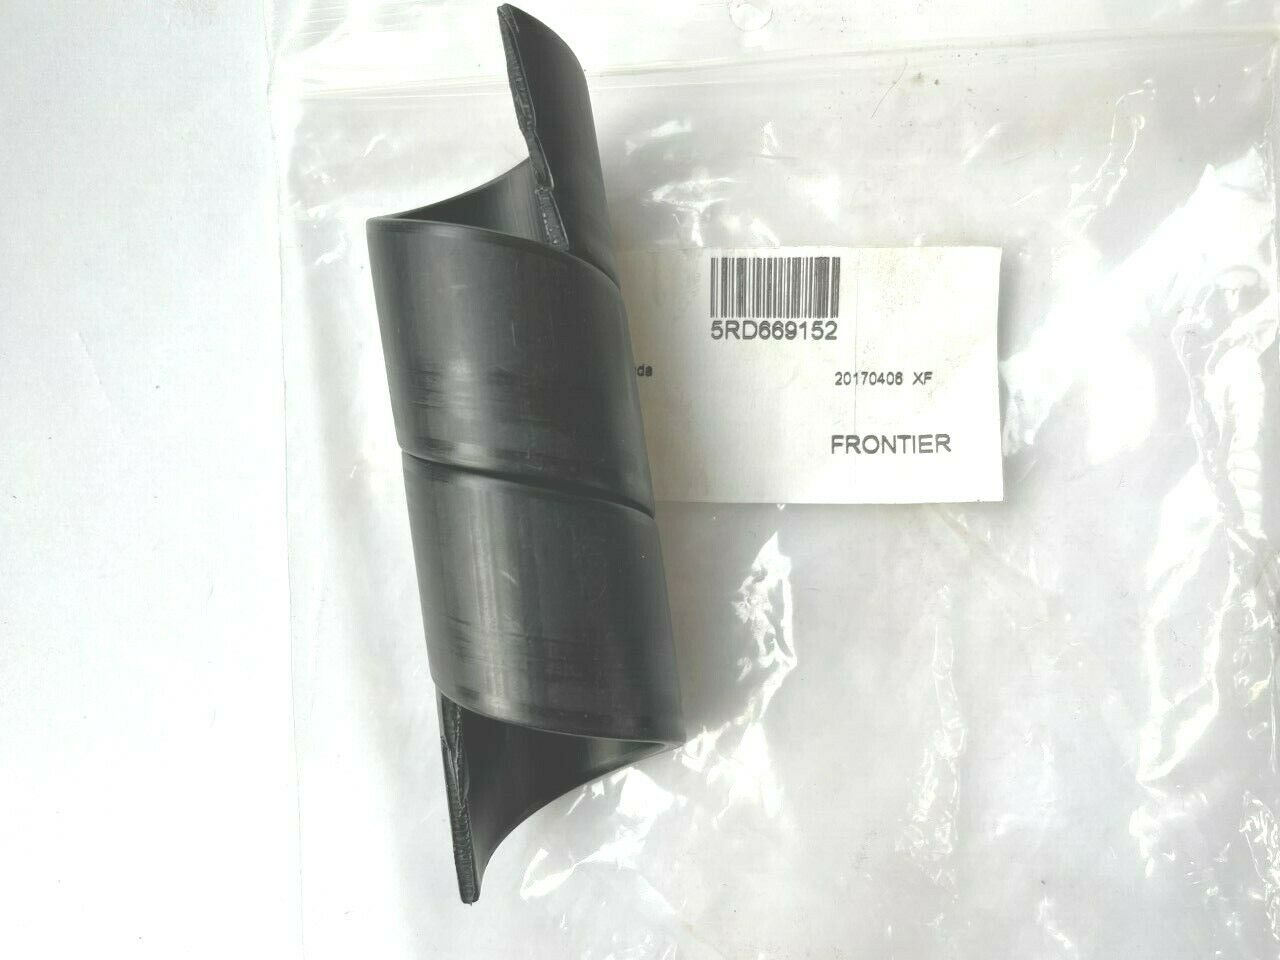 Frontier 1 New Oem 5rd669152 Platic 4" Guard For Hoses - Some Snowblowers